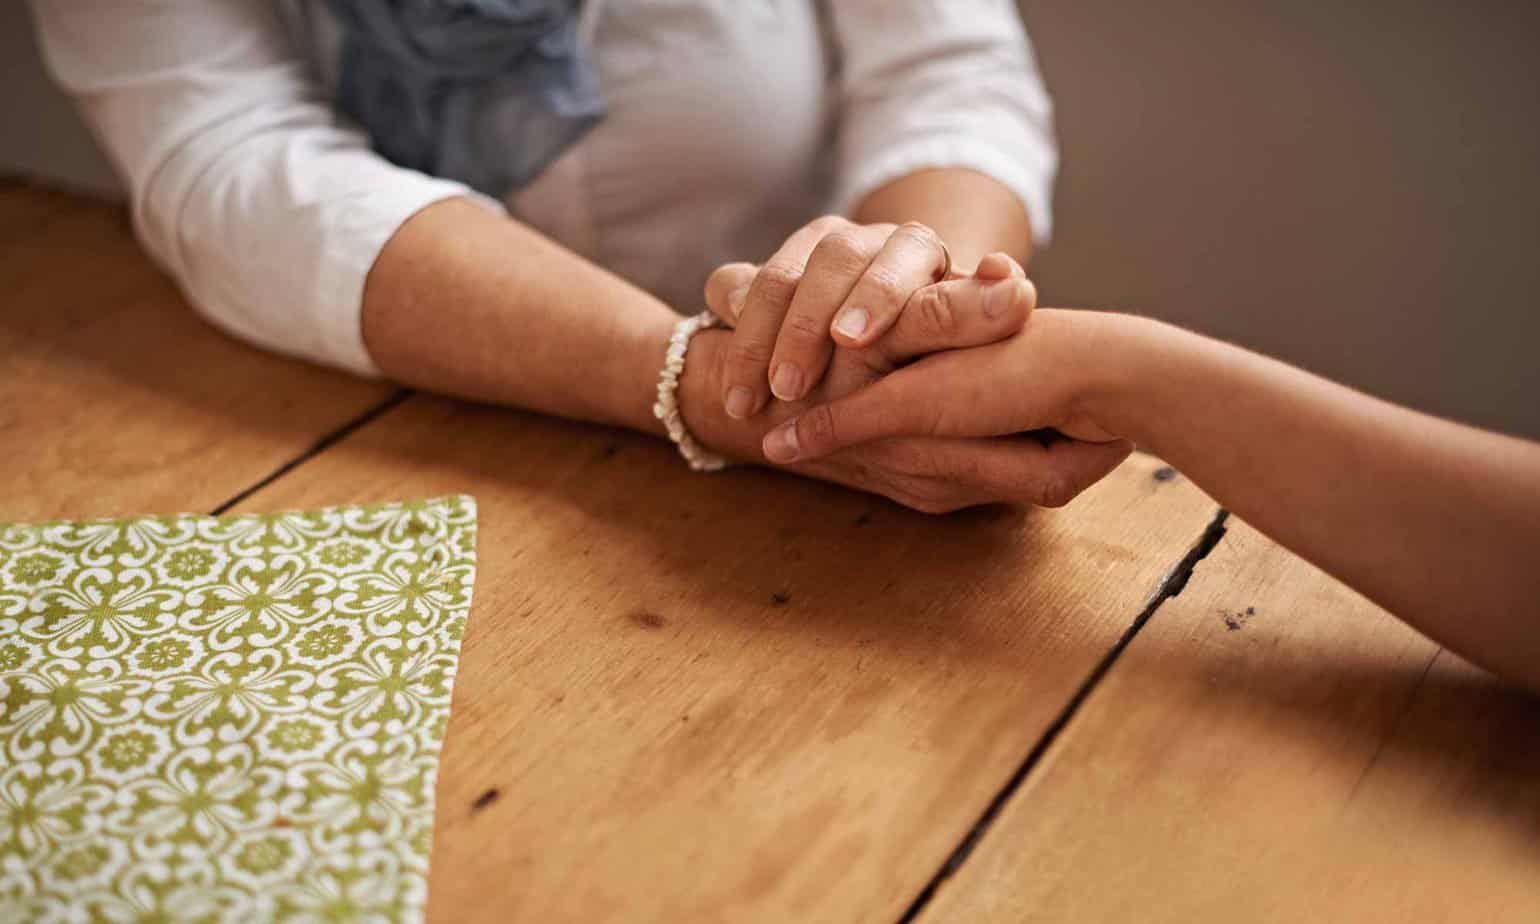 An older woman wearing a white shirt and bracelet holding a hand of a younger alcoholic on a wooden table at Mountainside Treatment Center